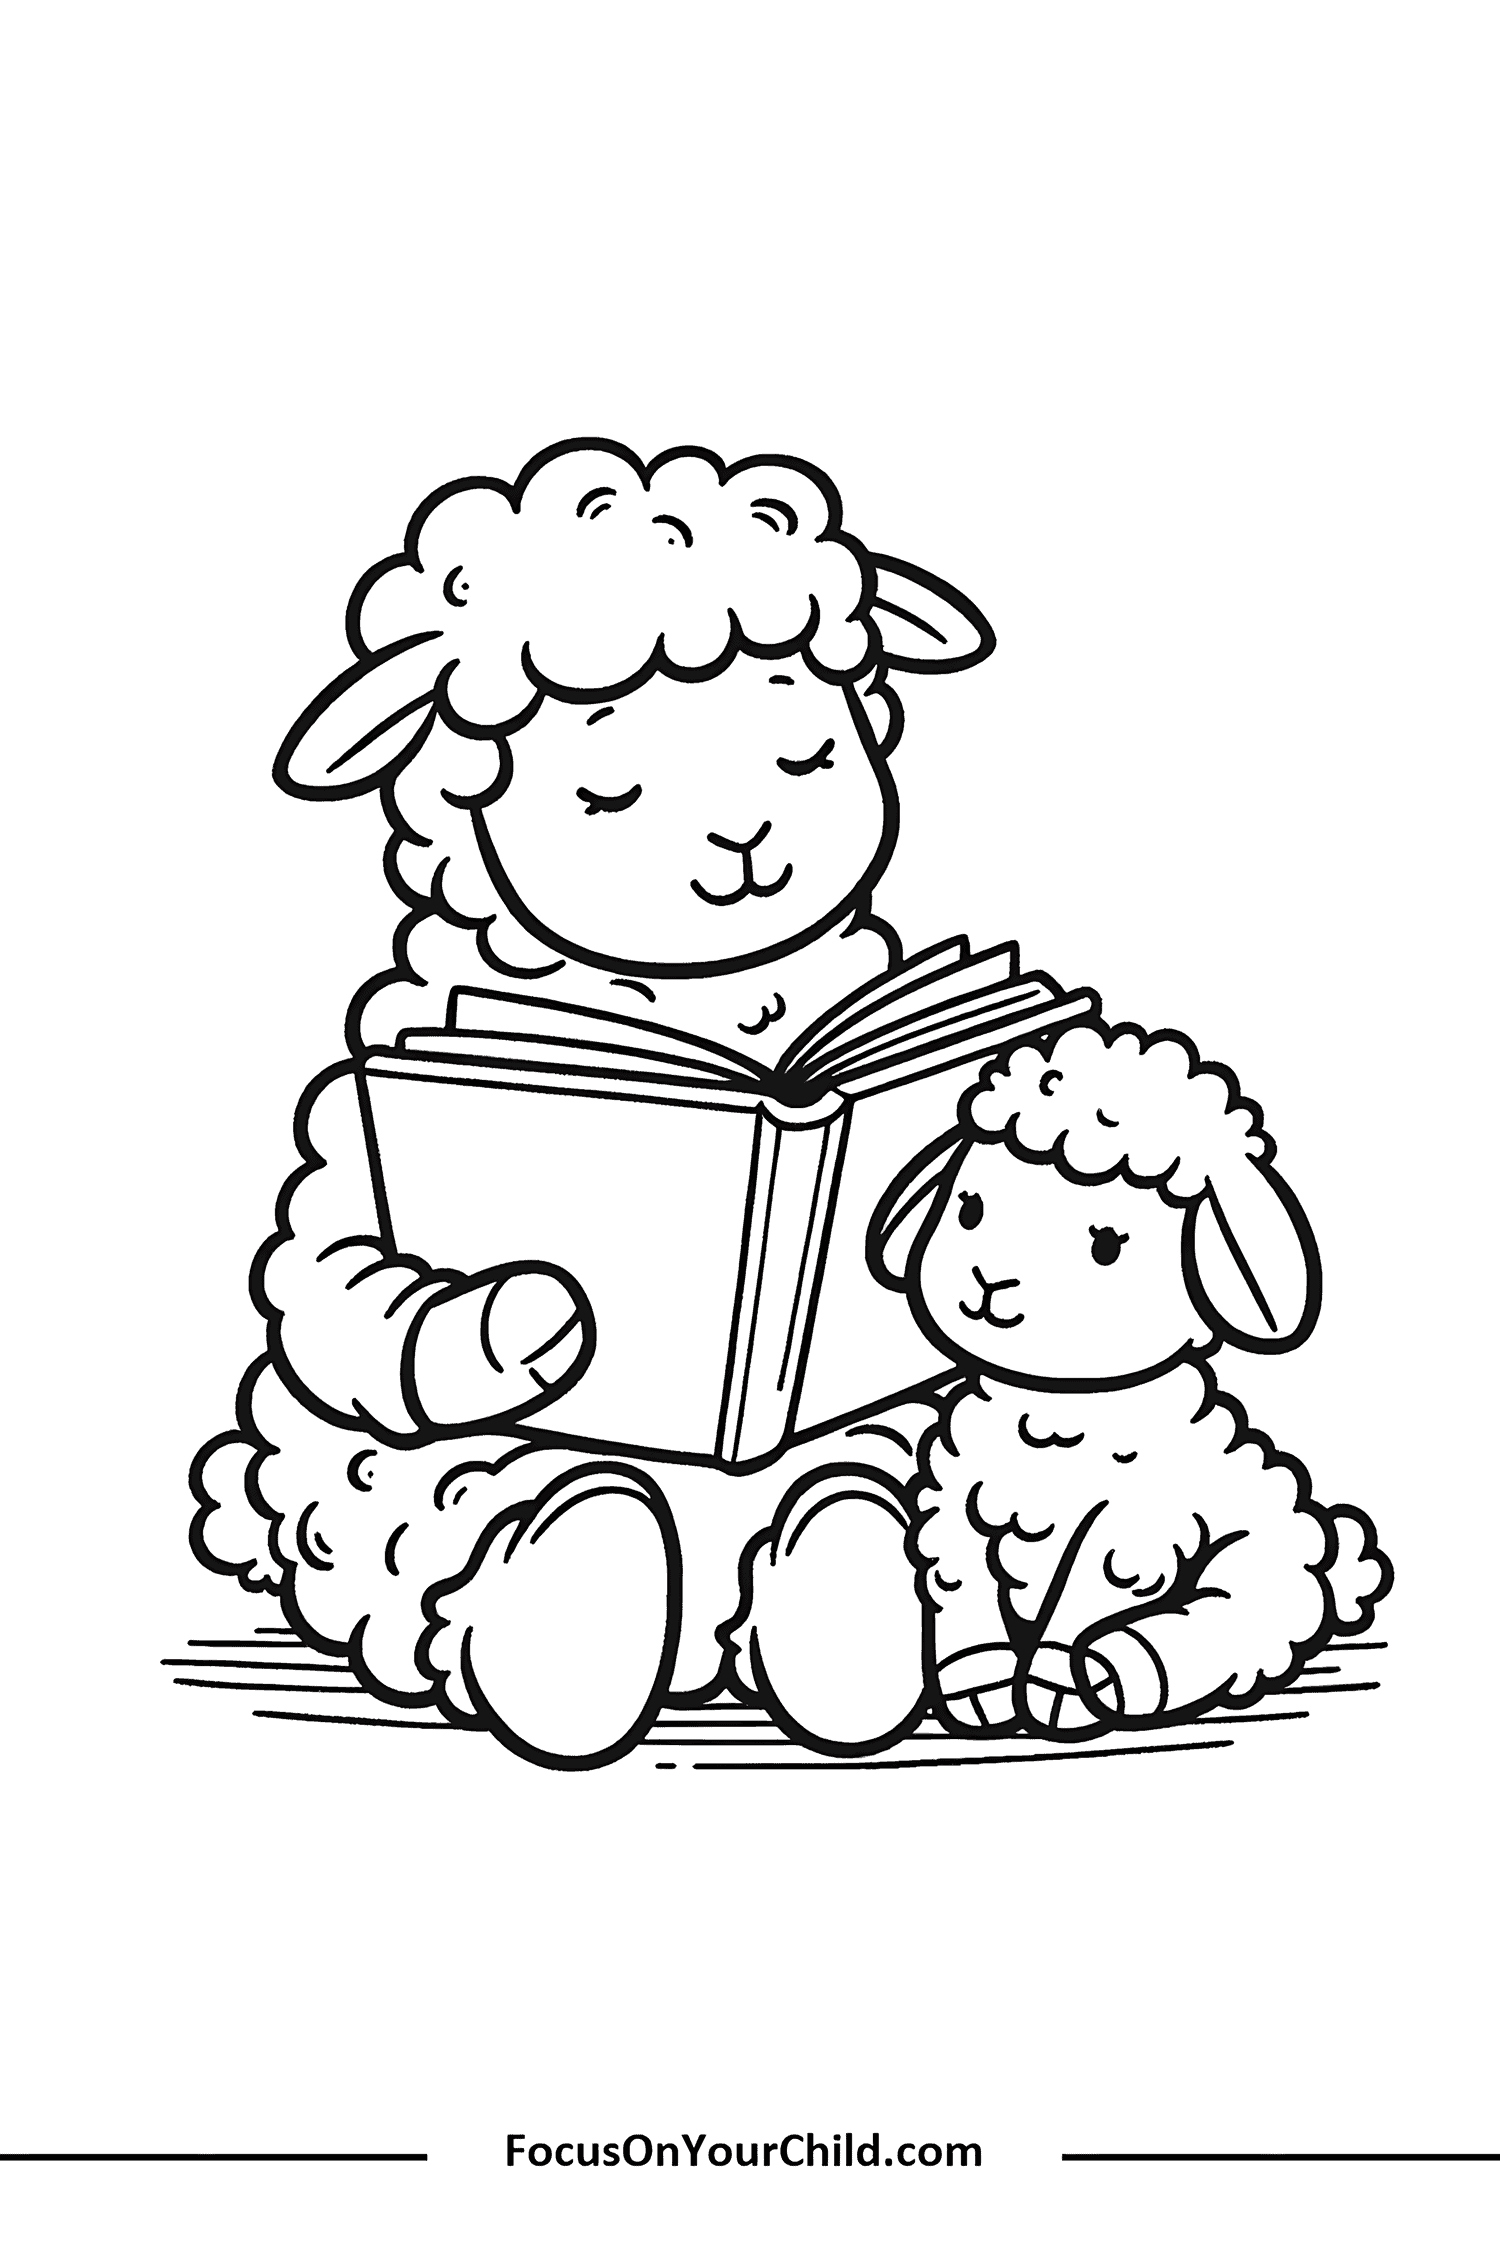 Illustration of two sheep bonding over a story, promoting family literacy and togetherness.